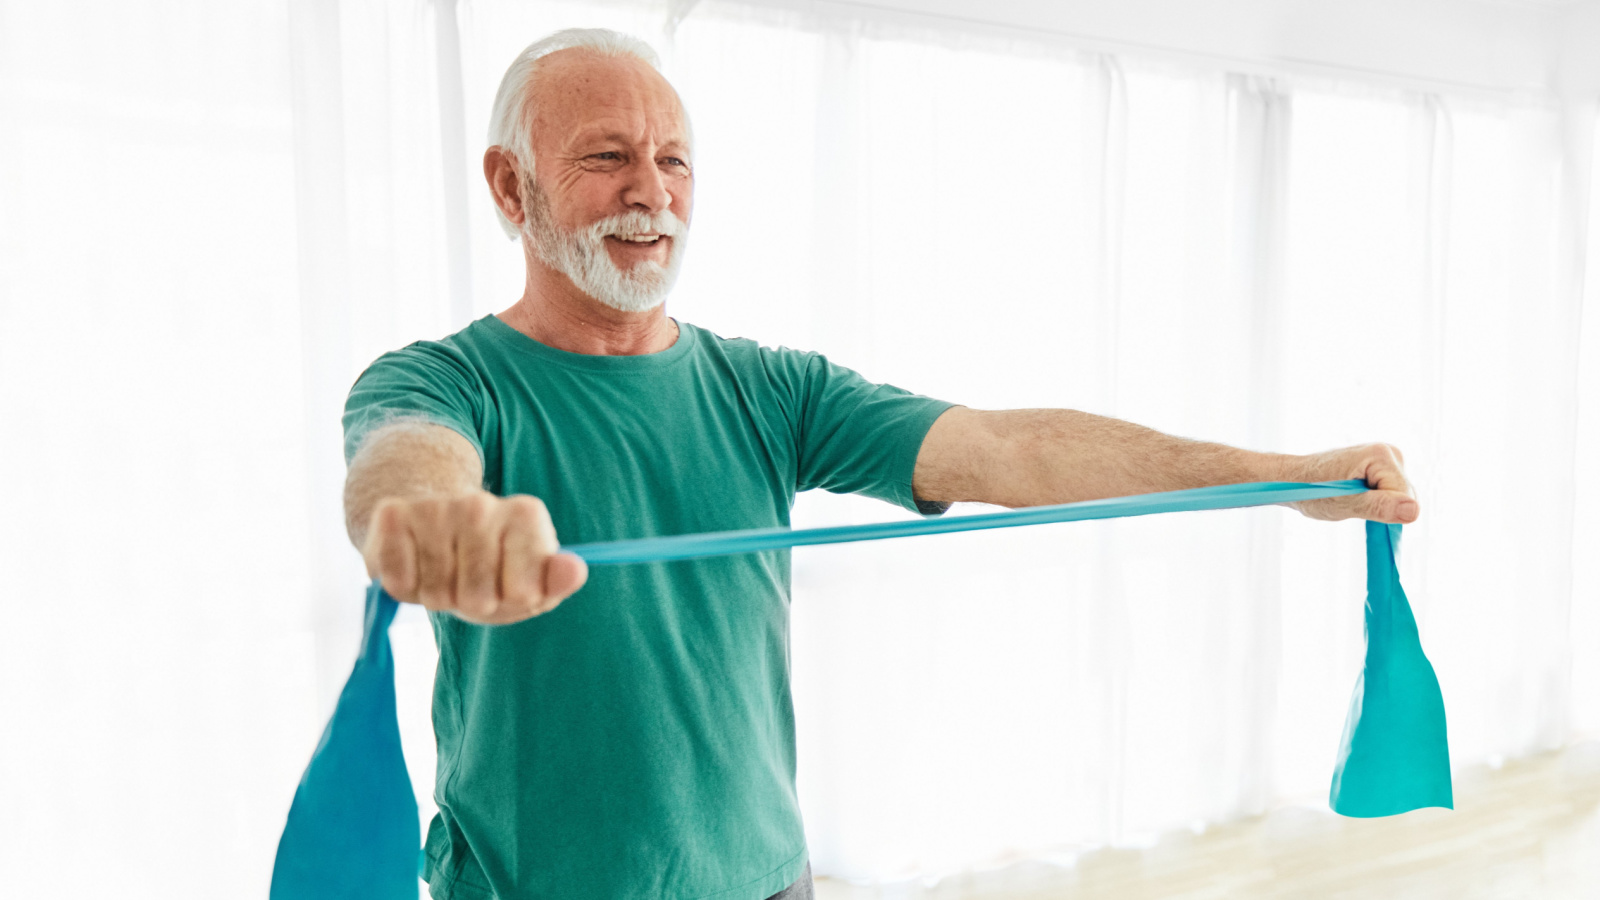 image credit: pics five/shutterstock <p><span>Build strength without heavy weights with resistance bands. Using bands offers a safe way to increase muscle tone and endurance. Each session introduces new exercises, ensuring a full-body workout that’s both challenging and accessible. Feel empowered as you notice your strength building week by week.</span></p>